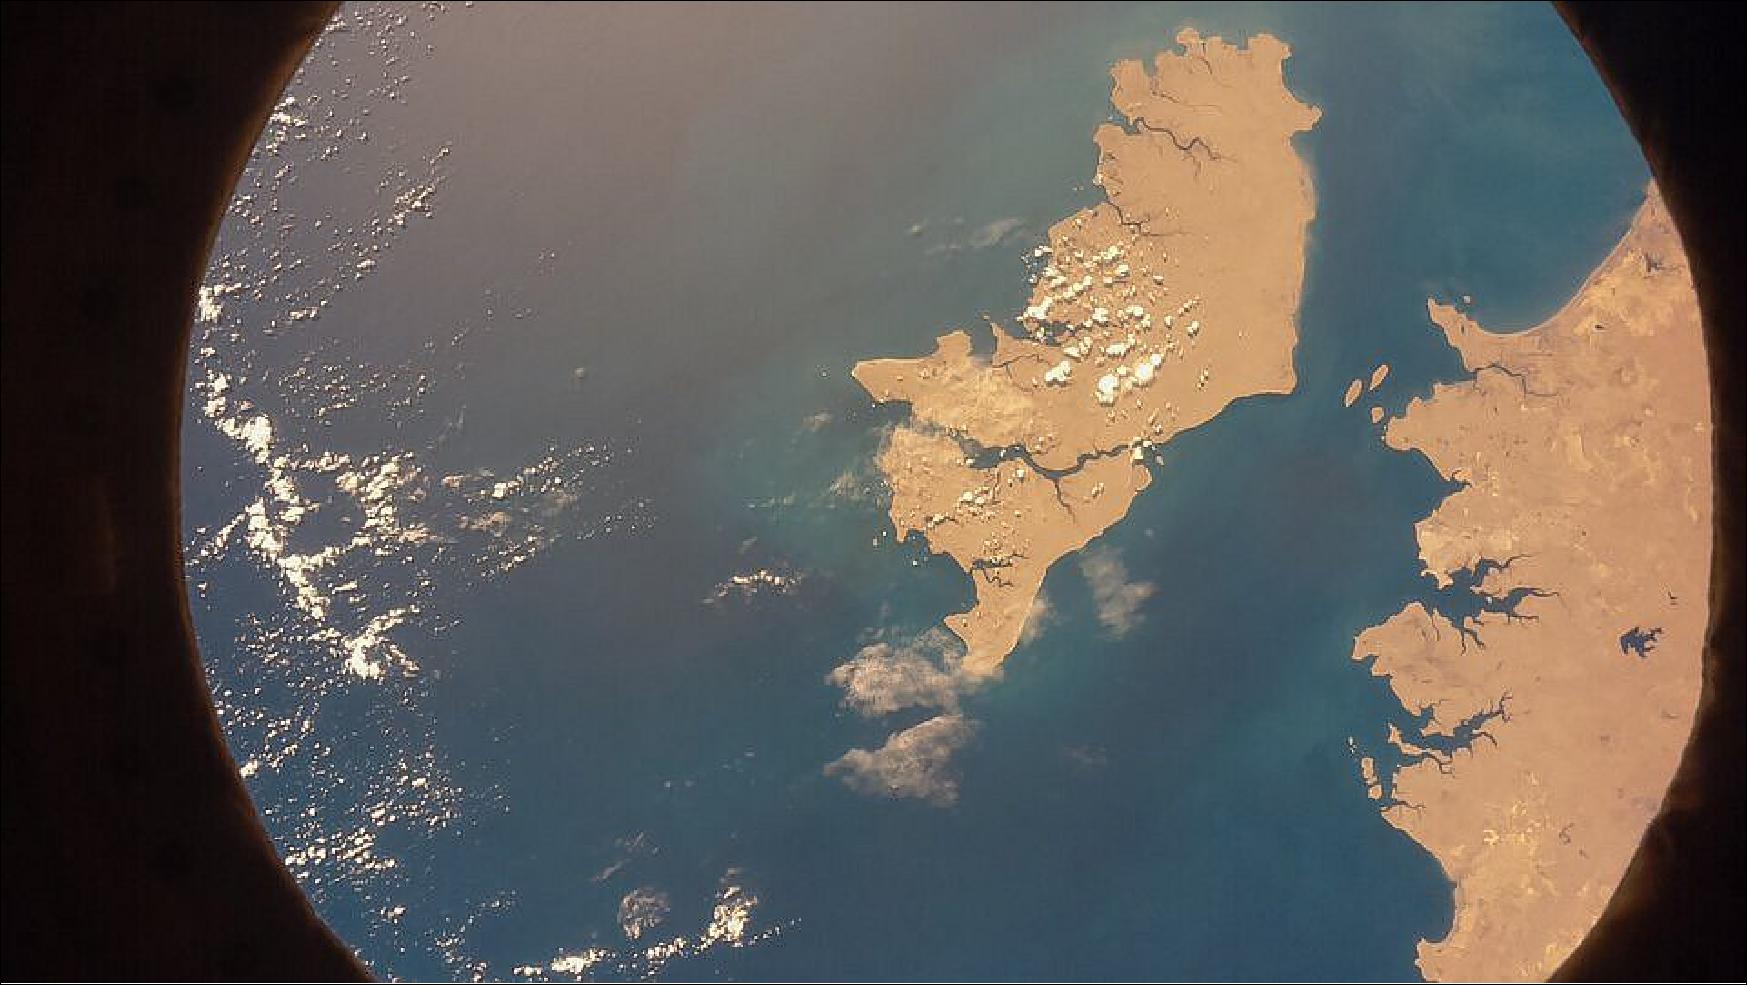 Figure 8: The Tiwi Islands off the coast of N Australia, from Magtrix (image credit: ESA)